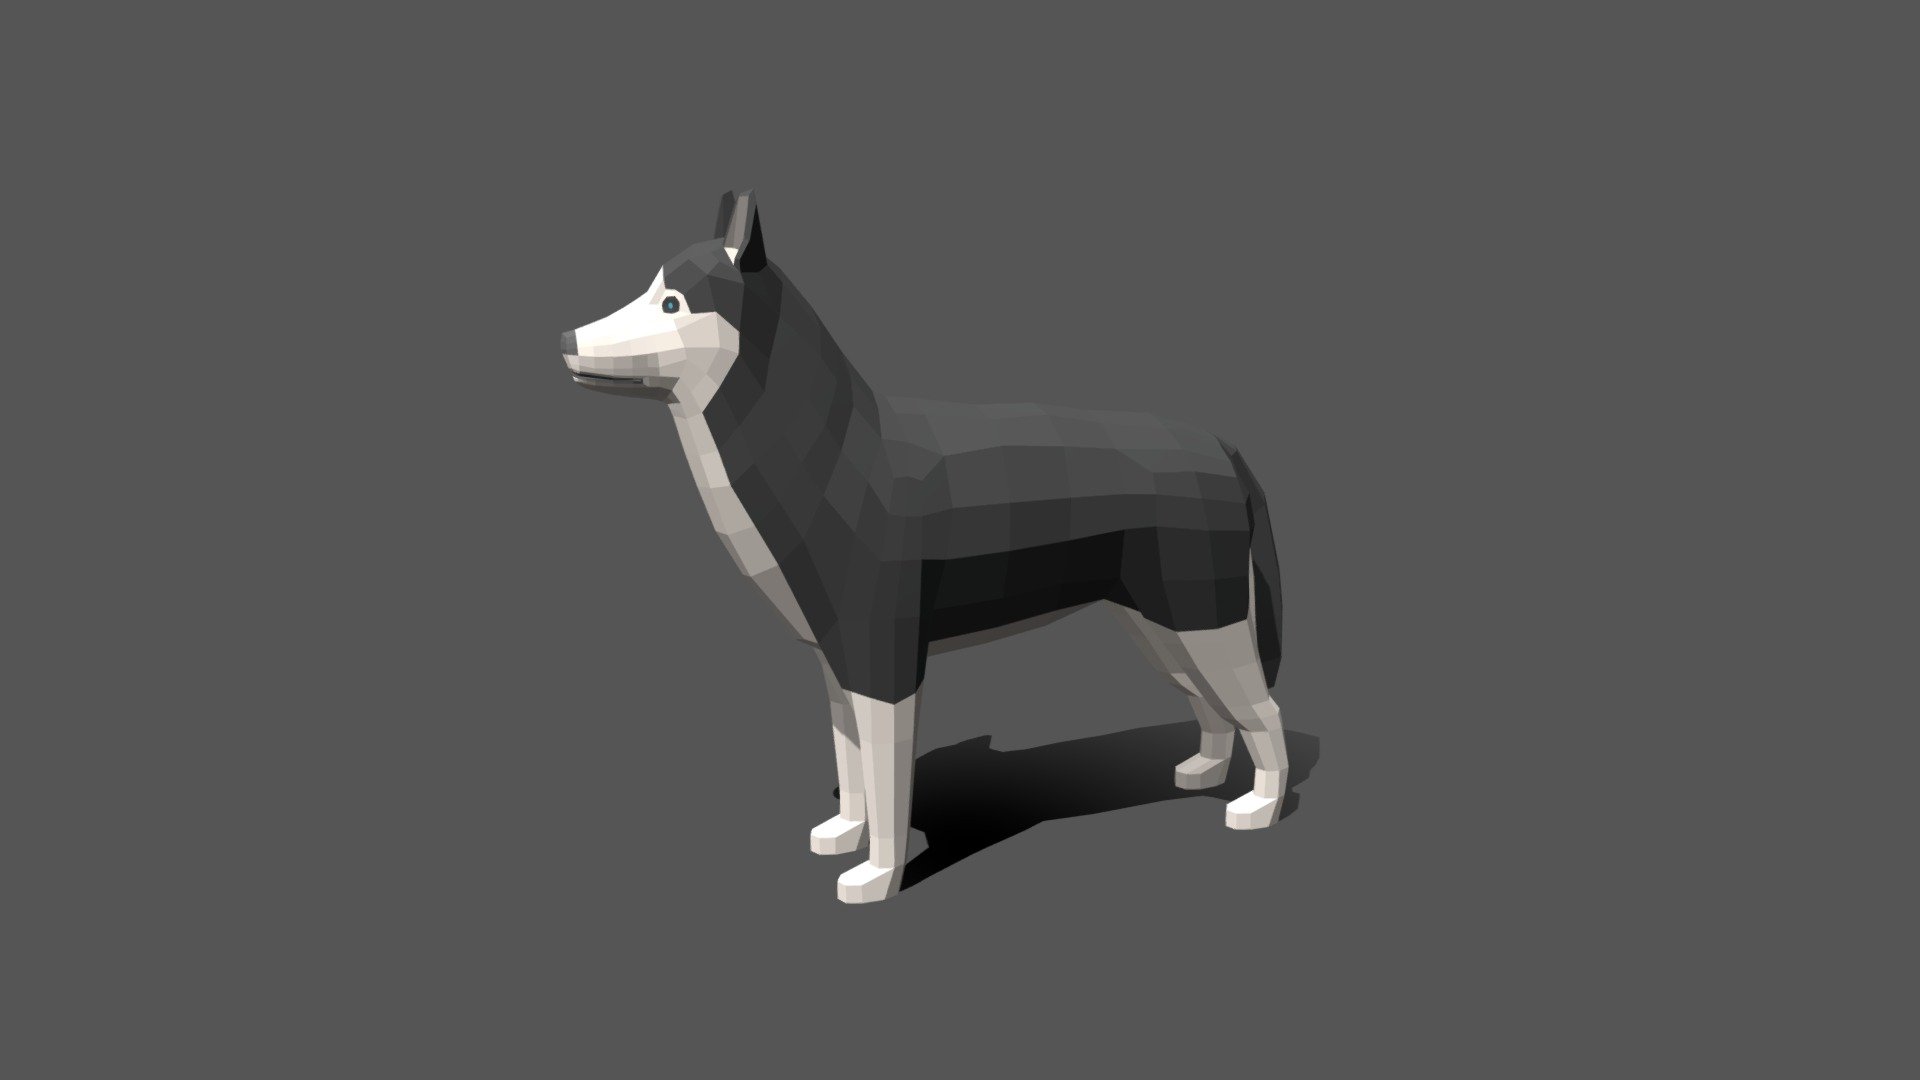 This is a low poly 3D model of a Husky. The low poly dog was modeled and prepared for low-poly style renderings, background, general CG visualization presented as a mesh with quads only.

Verts : 930 Faces: 928

The 3D model have simple materials with diffuse colors.

No ring, maps and no UVW mapping is available.

The original file was created in blender. You will receive a 3DS, OBJ, FBX, blend, DAE, Stl.

All preview images were rendered with Blender Cycles. Product is ready to render out-of-the-box. Please note that the lights, cameras, and background is only included in the .blend file. The model is clean and alone in the other provided files, centred at origin and has real-world scale 3d model